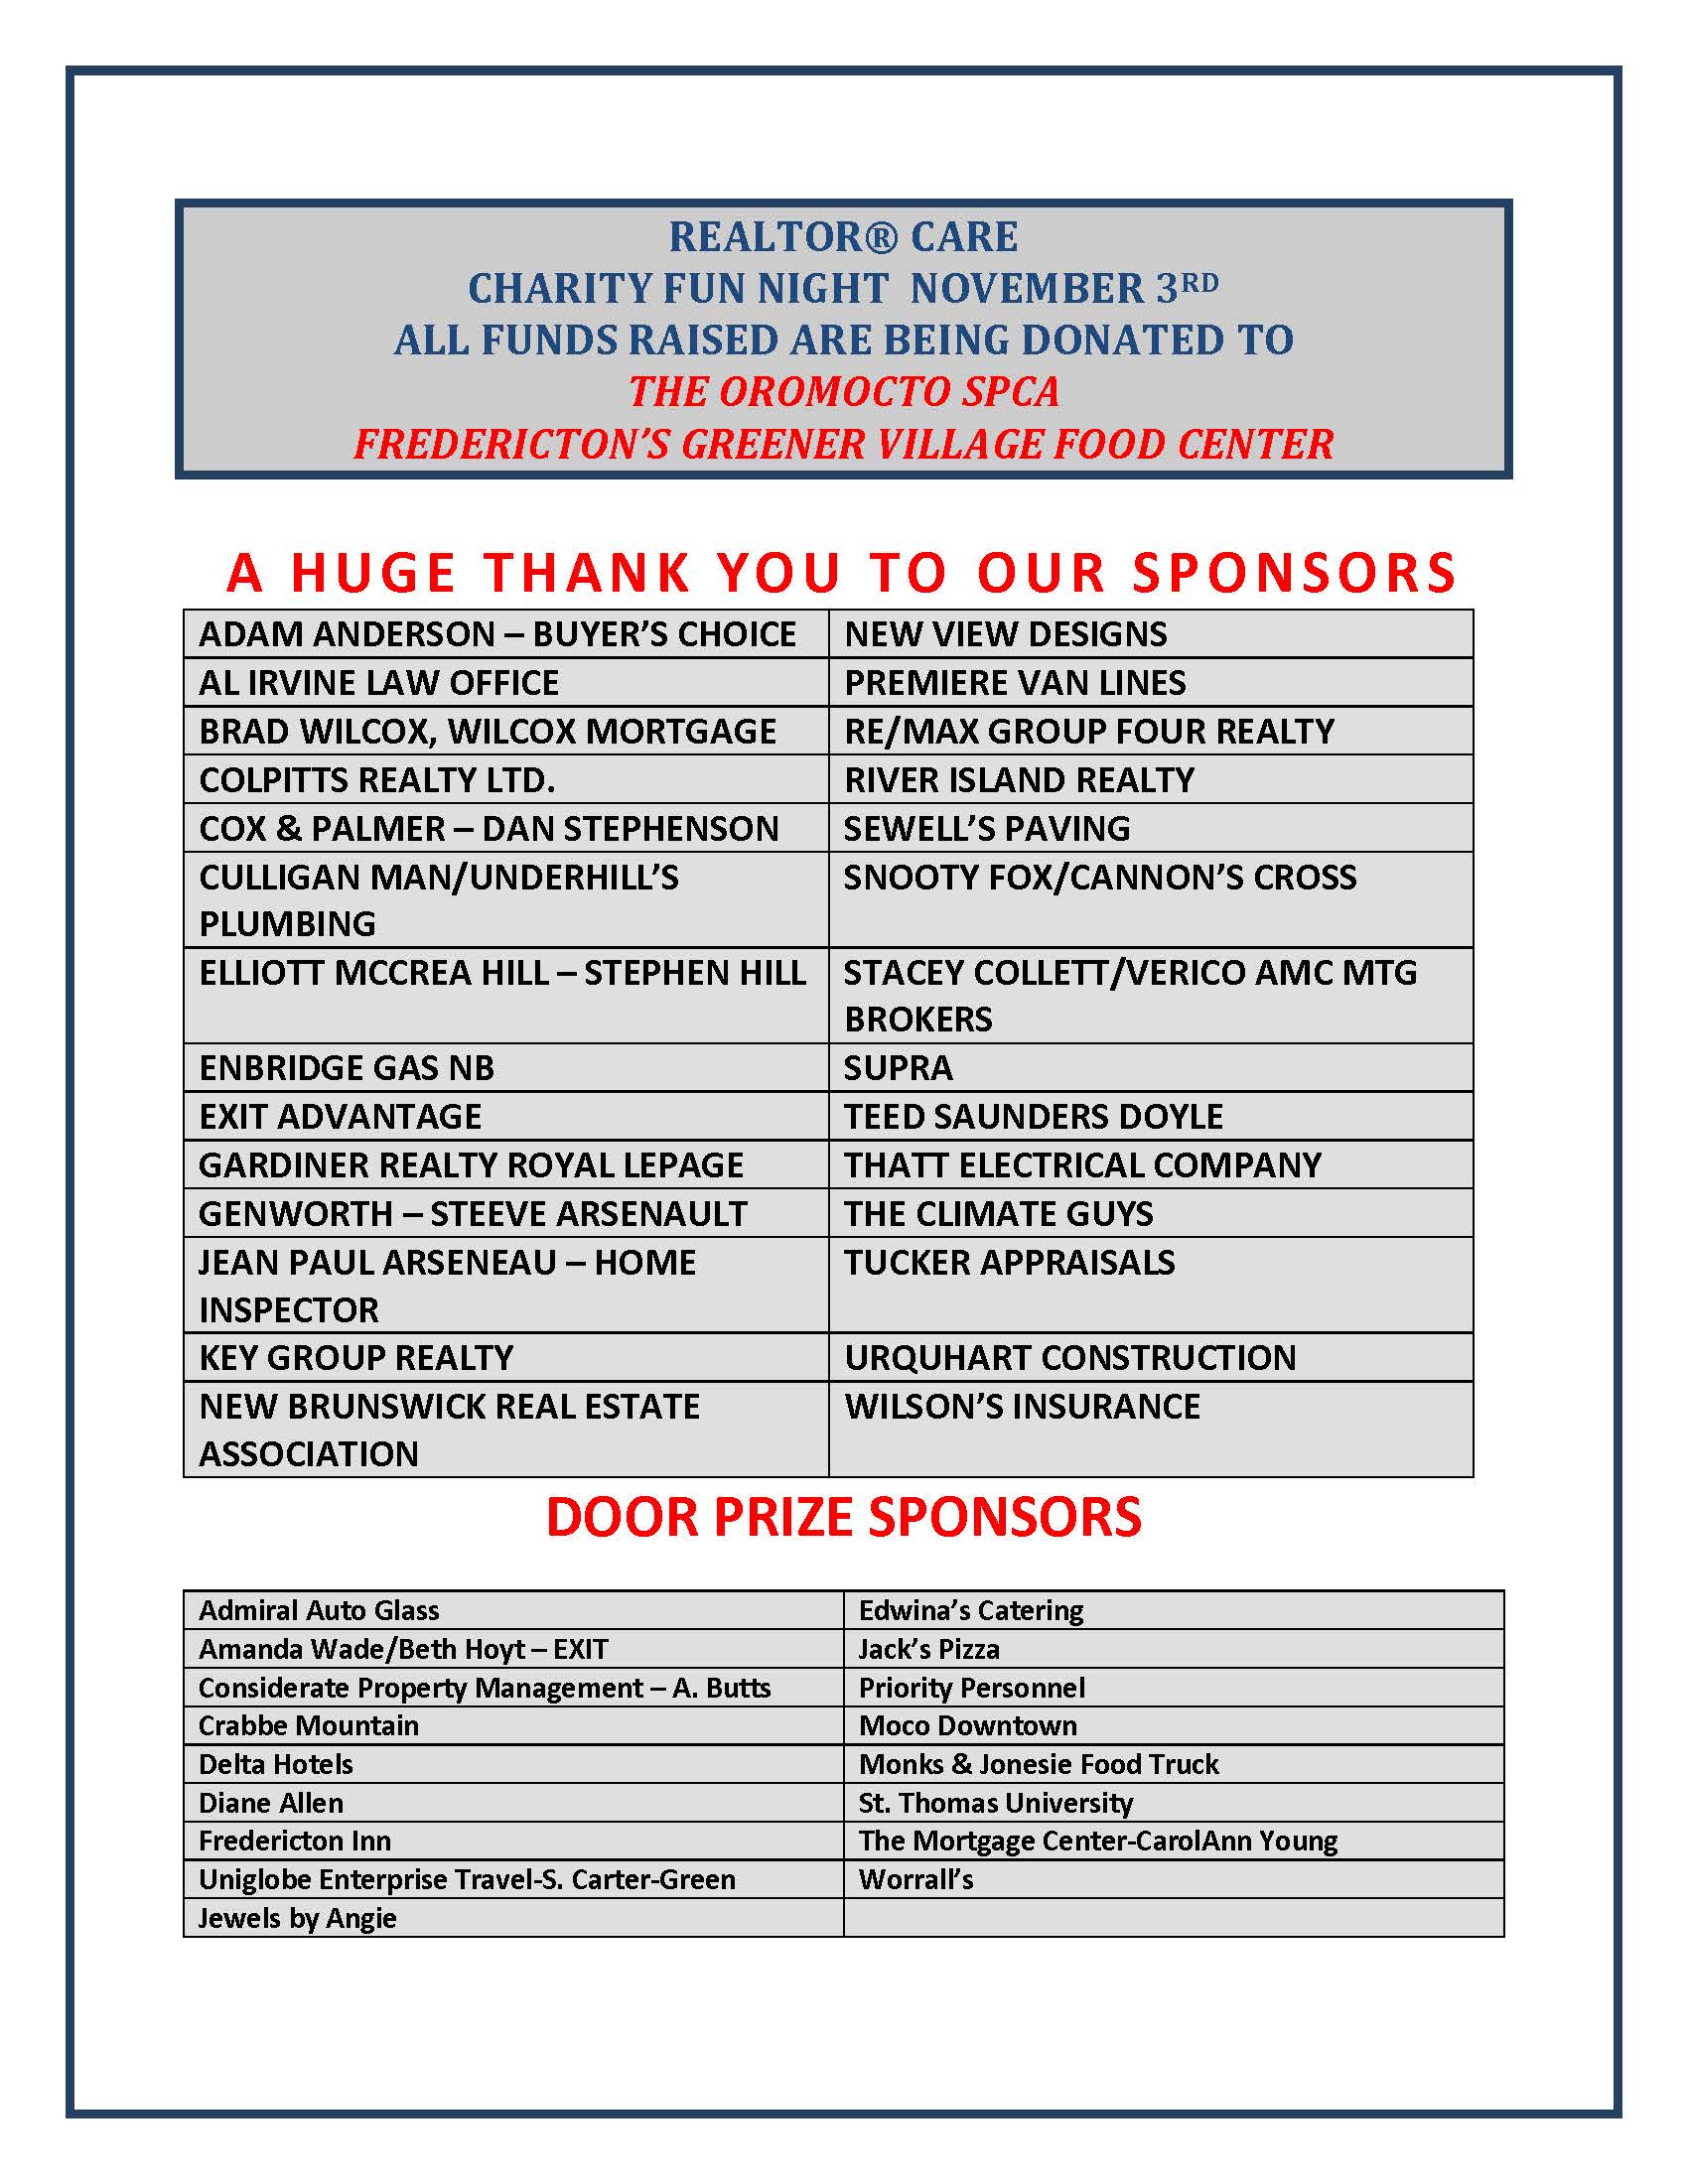 Realtor CARE® Charity Night - Our Generous Sponsors